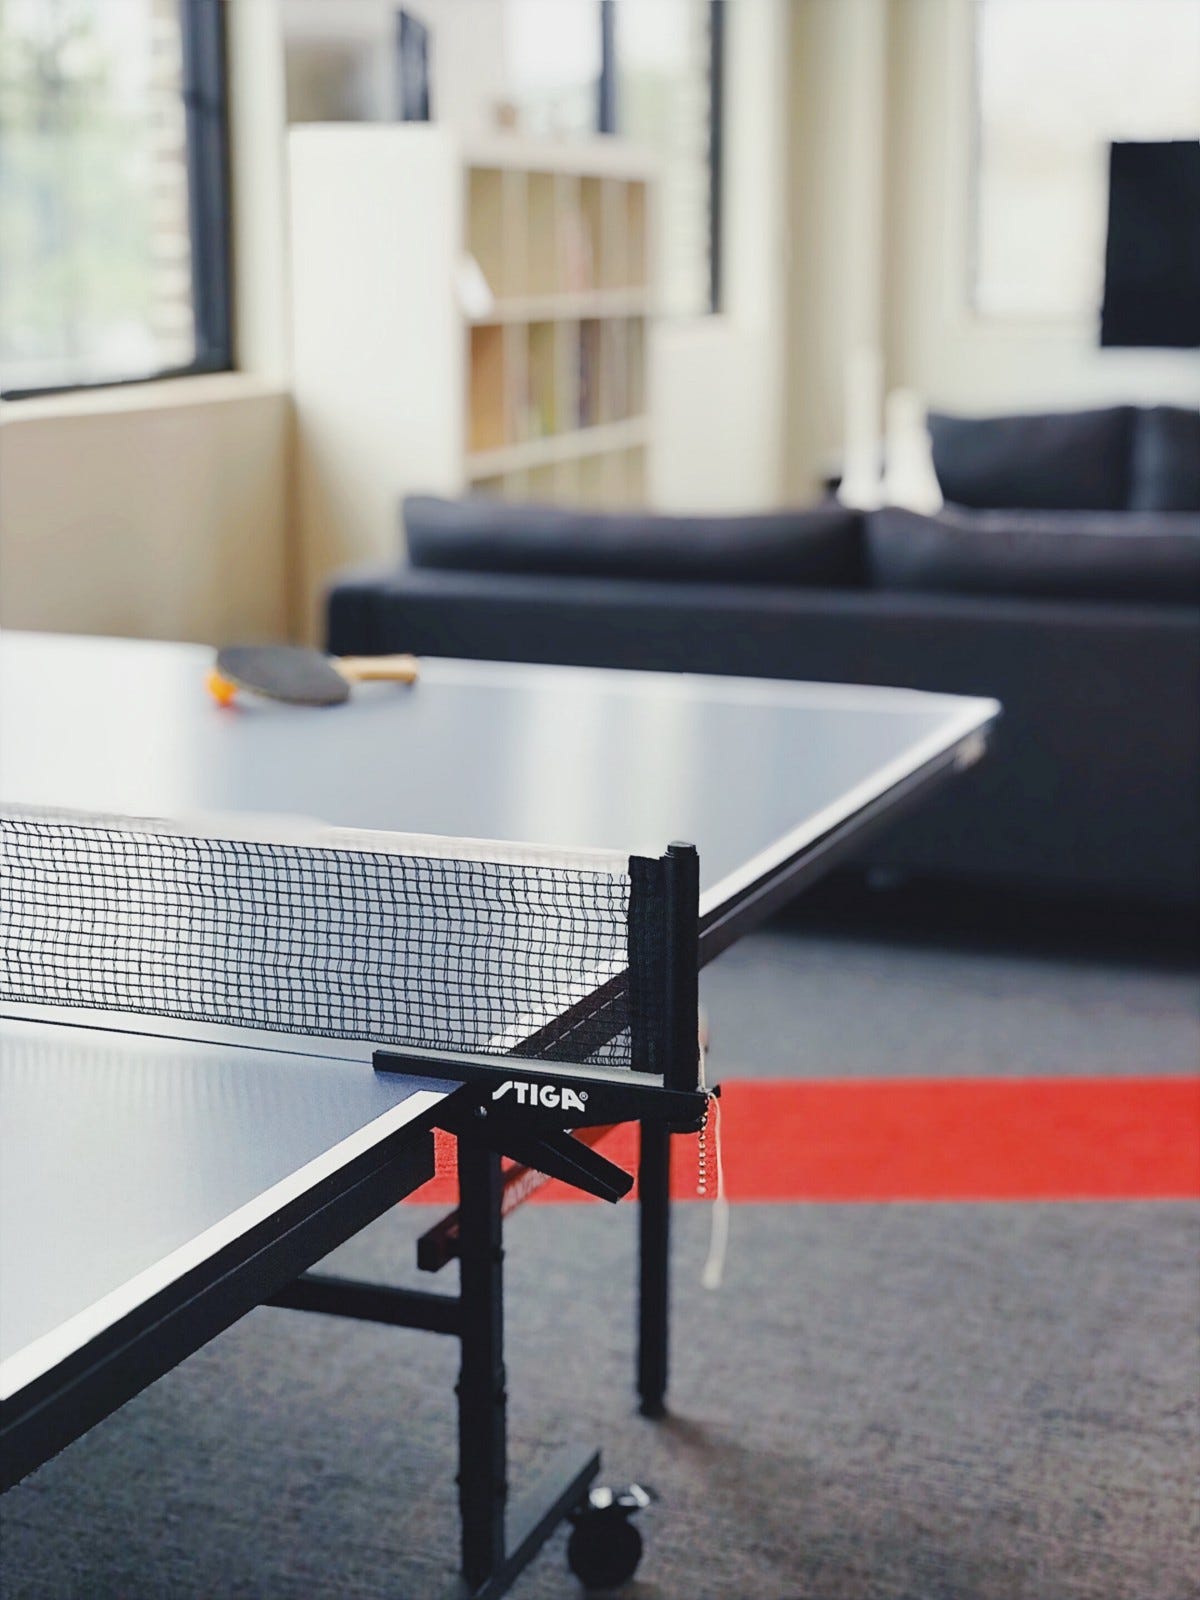 Image of a ping pong table in an office space